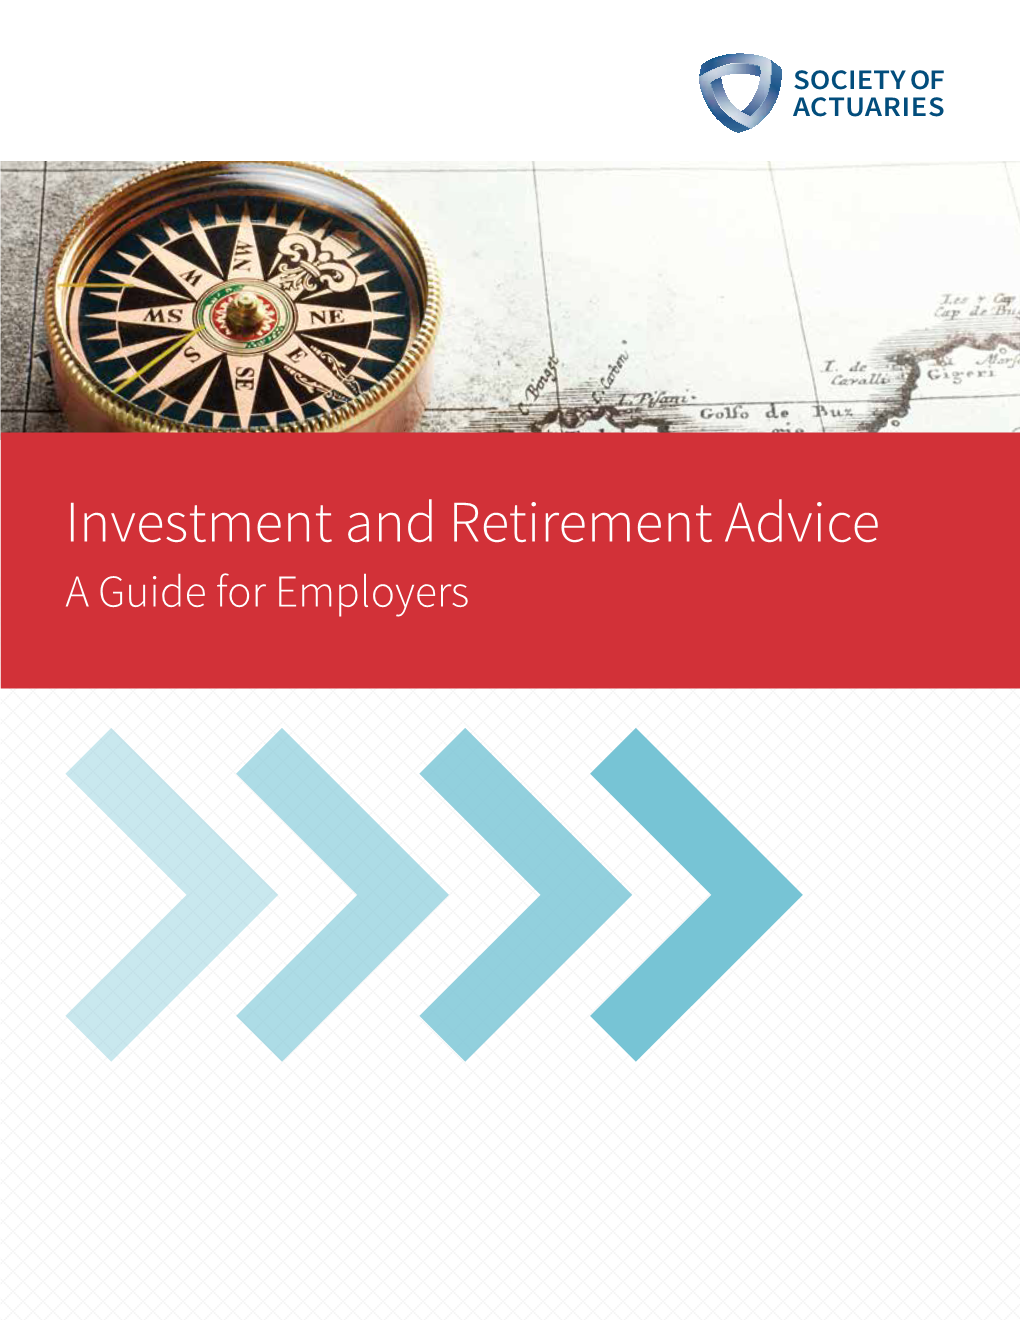 Investment and Retirement Advice a Guide for Employers